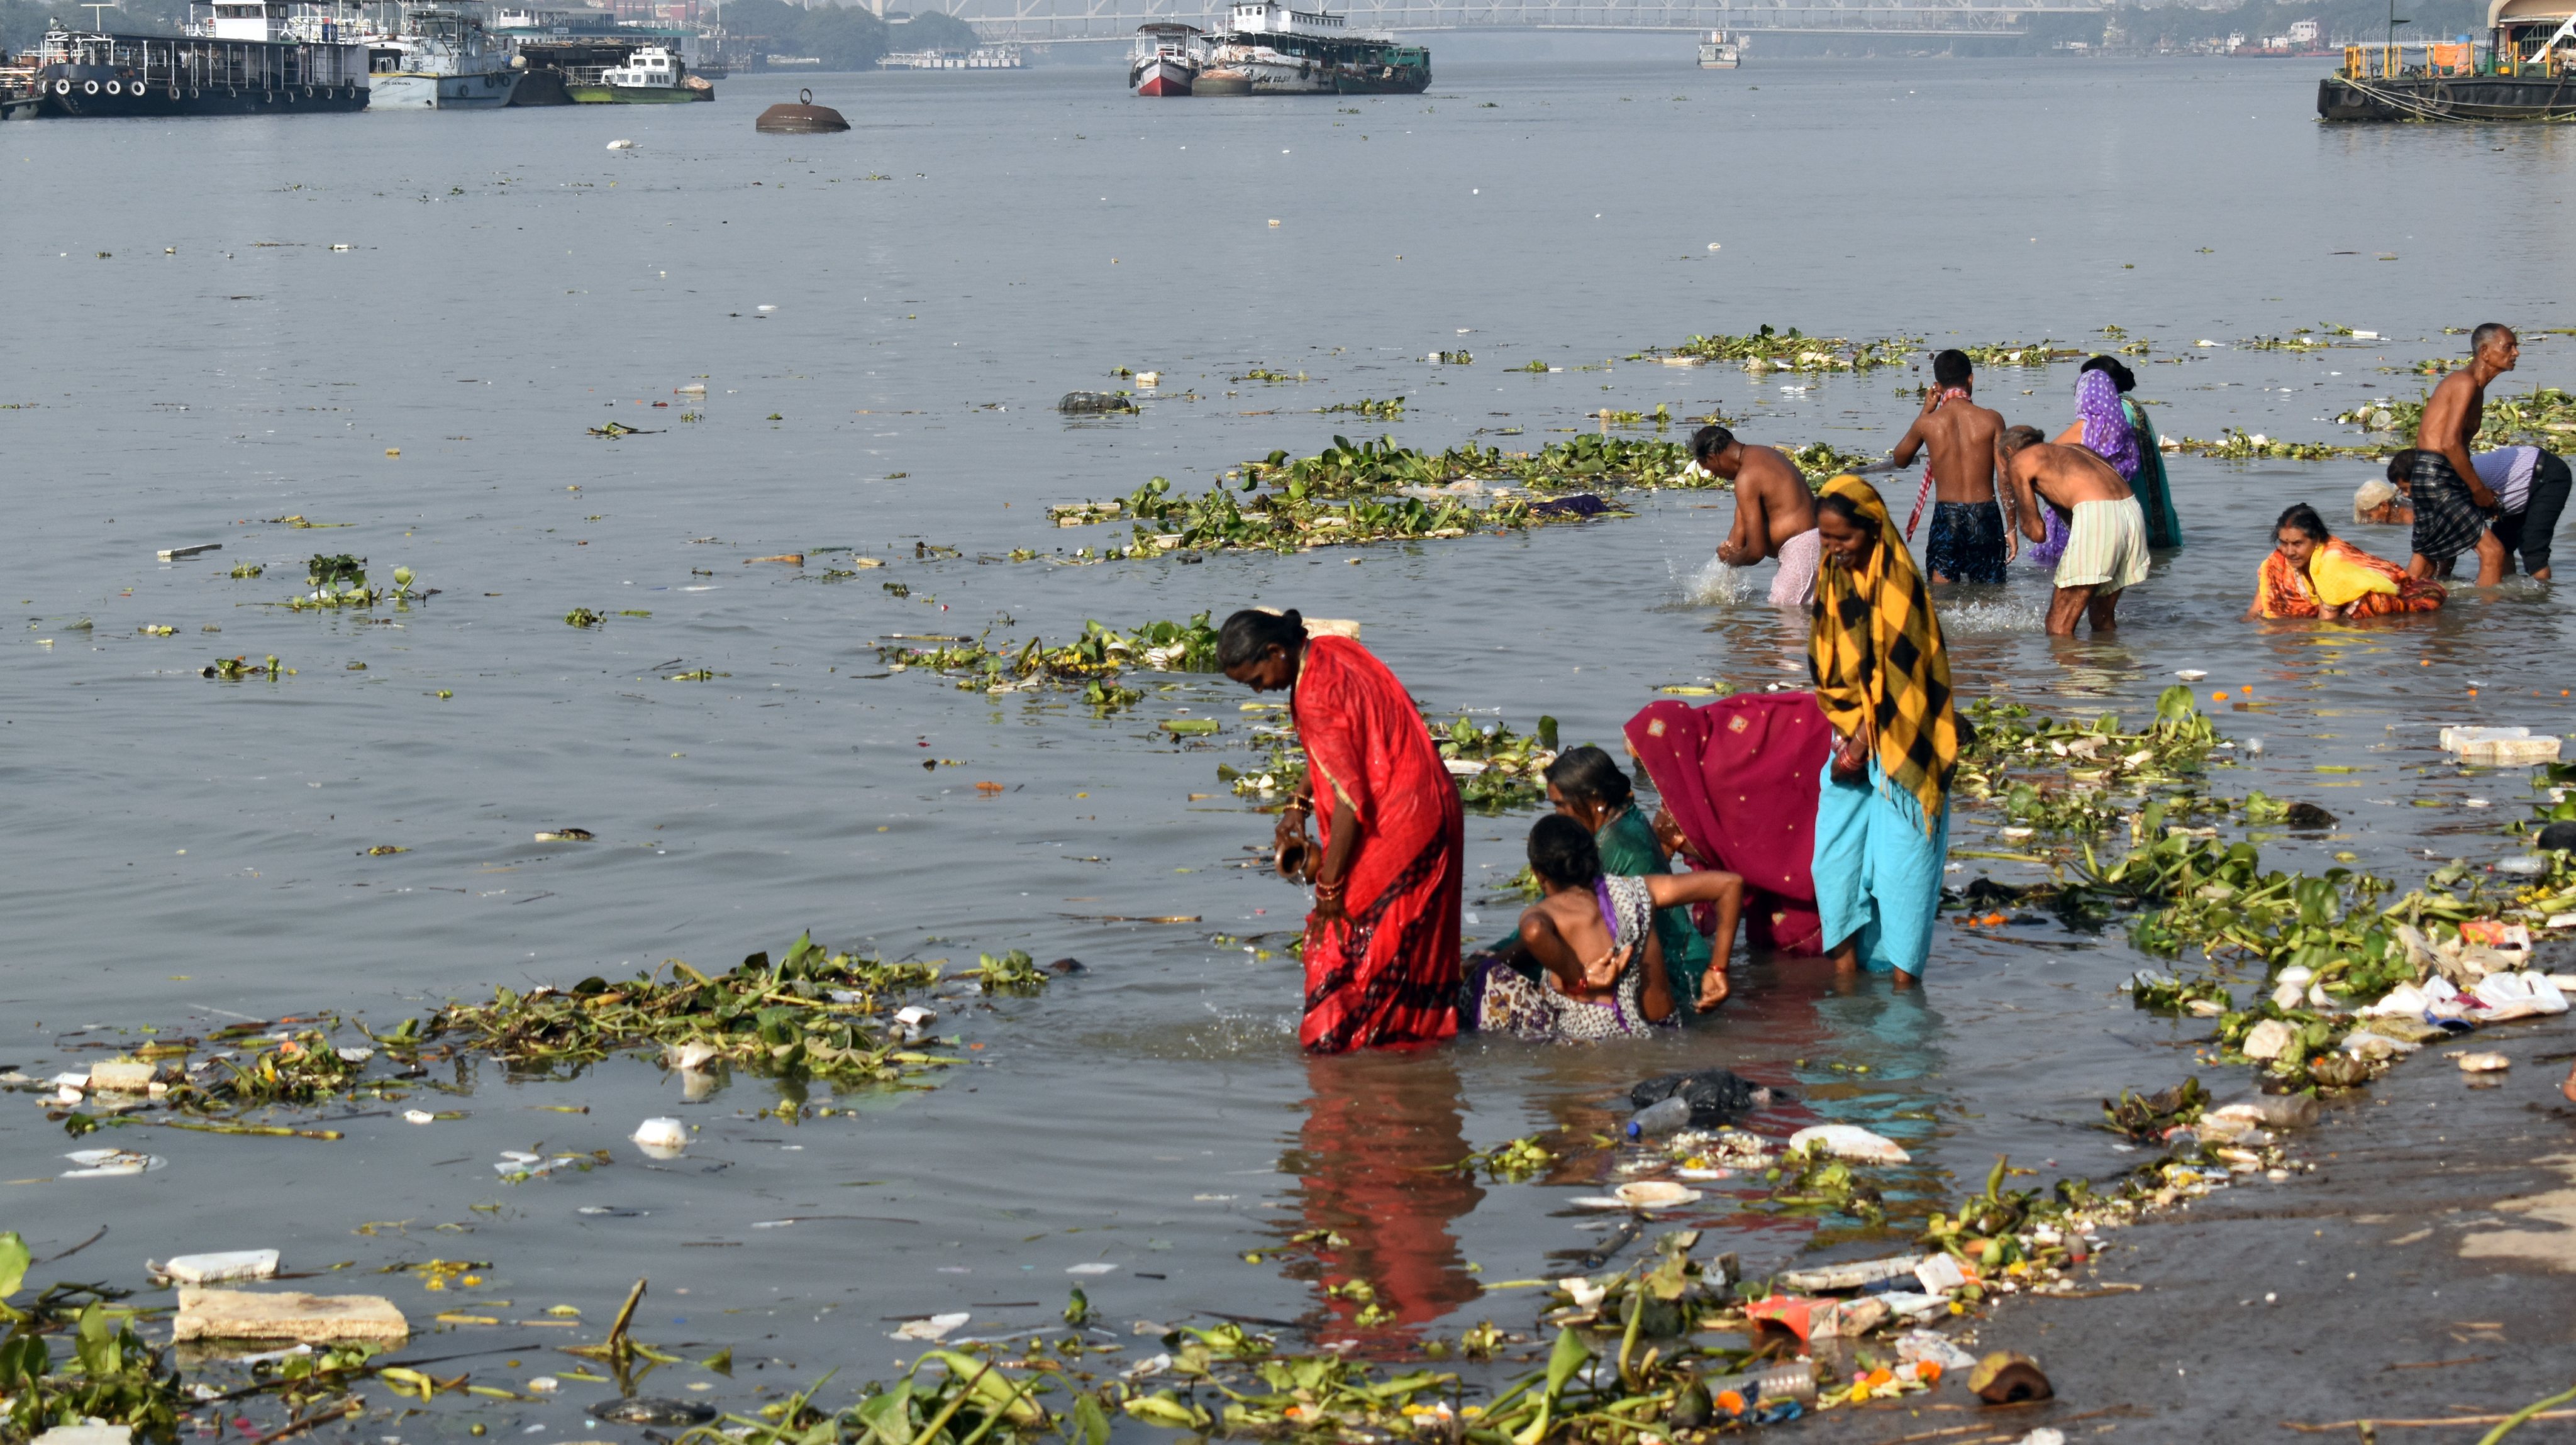 People are bathing in the polluted water of Ganaga at